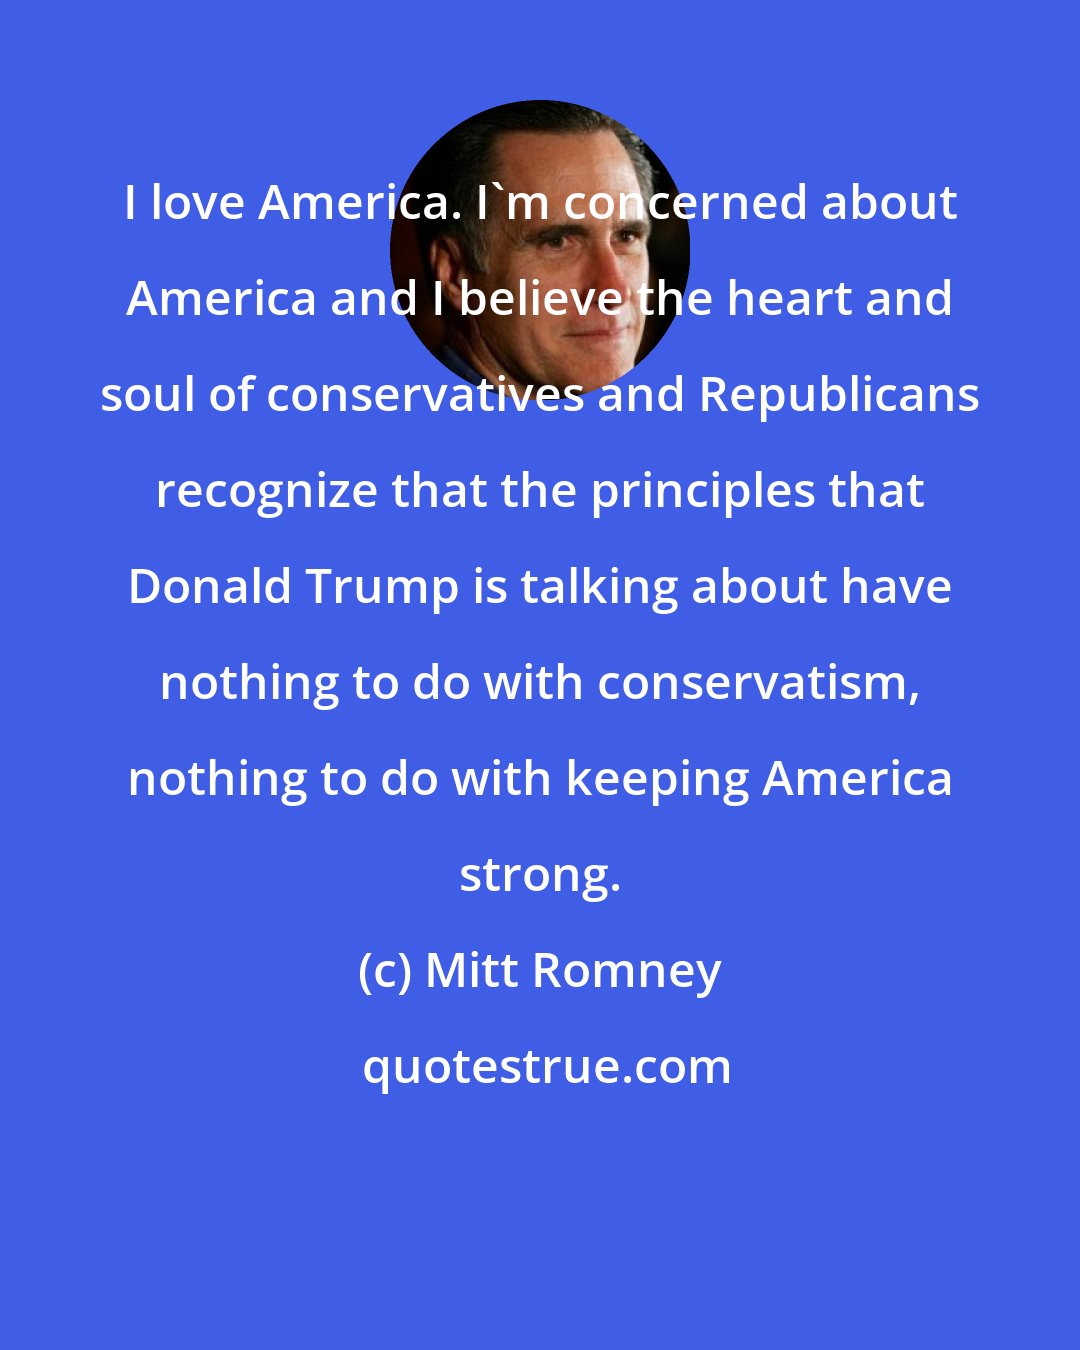 Mitt Romney: I love America. I'm concerned about America and I believe the heart and soul of conservatives and Republicans recognize that the principles that Donald Trump is talking about have nothing to do with conservatism, nothing to do with keeping America strong.